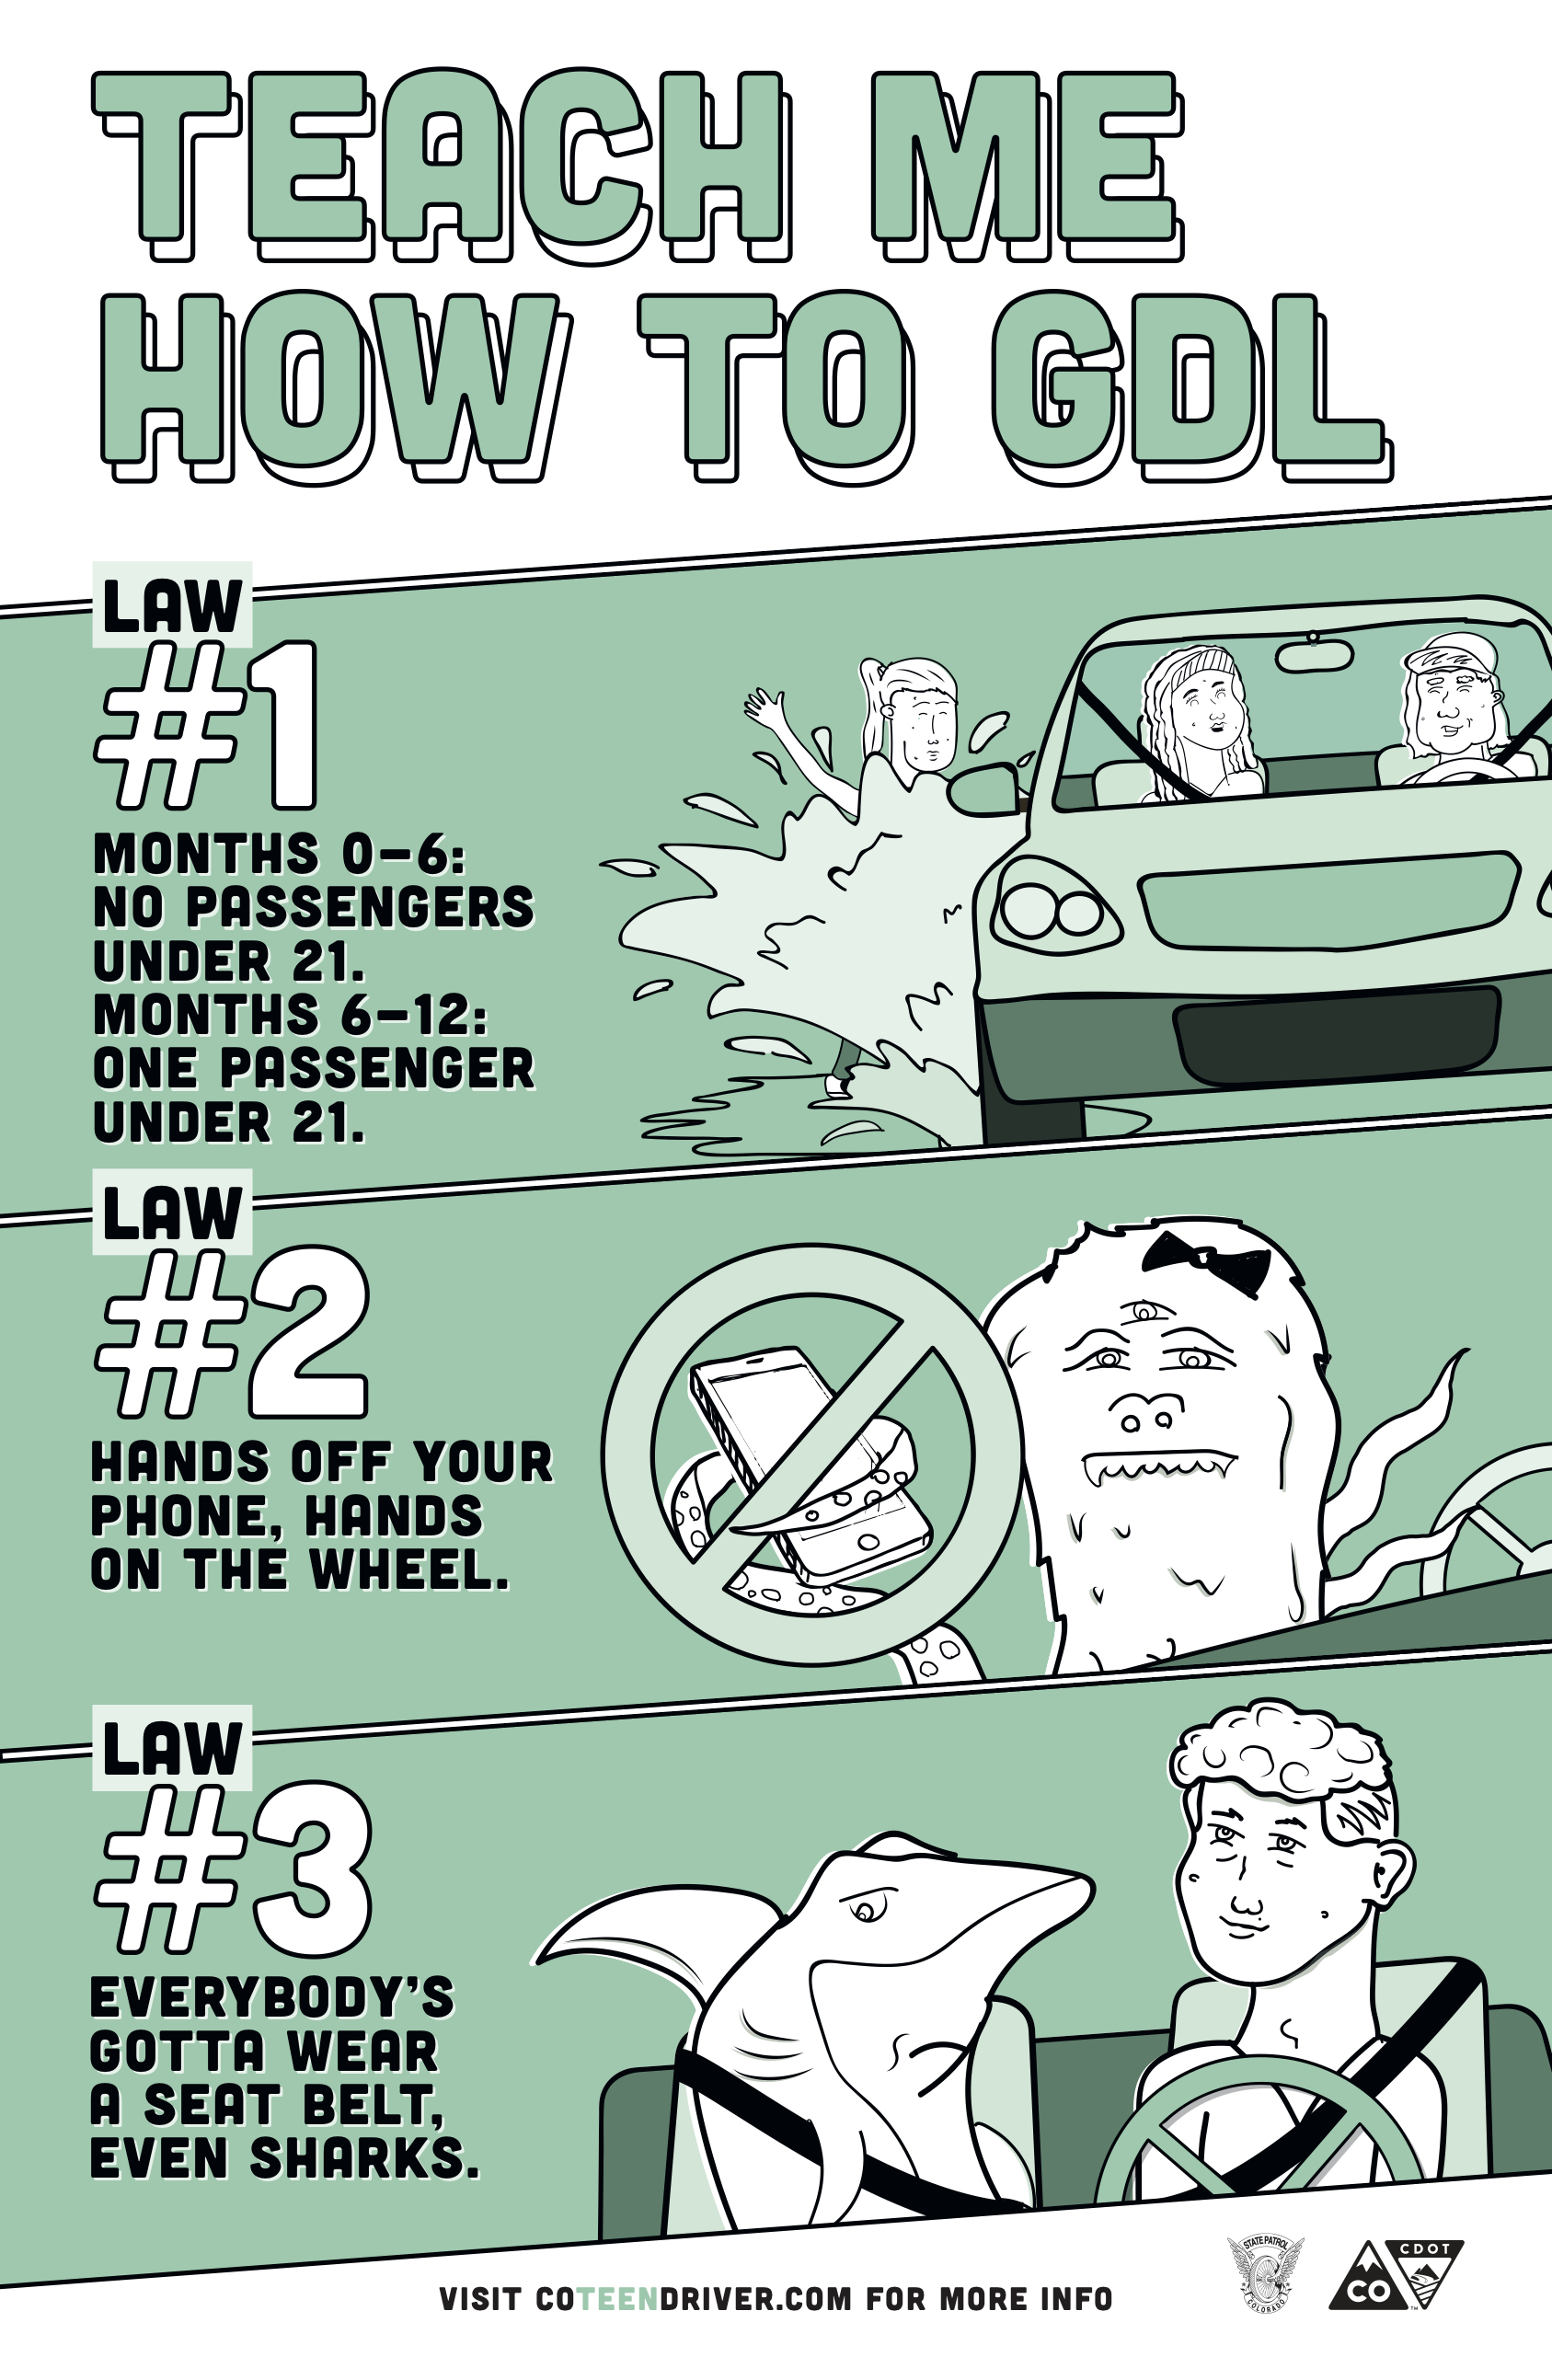 Teen Driving Campaign 2018 detail image